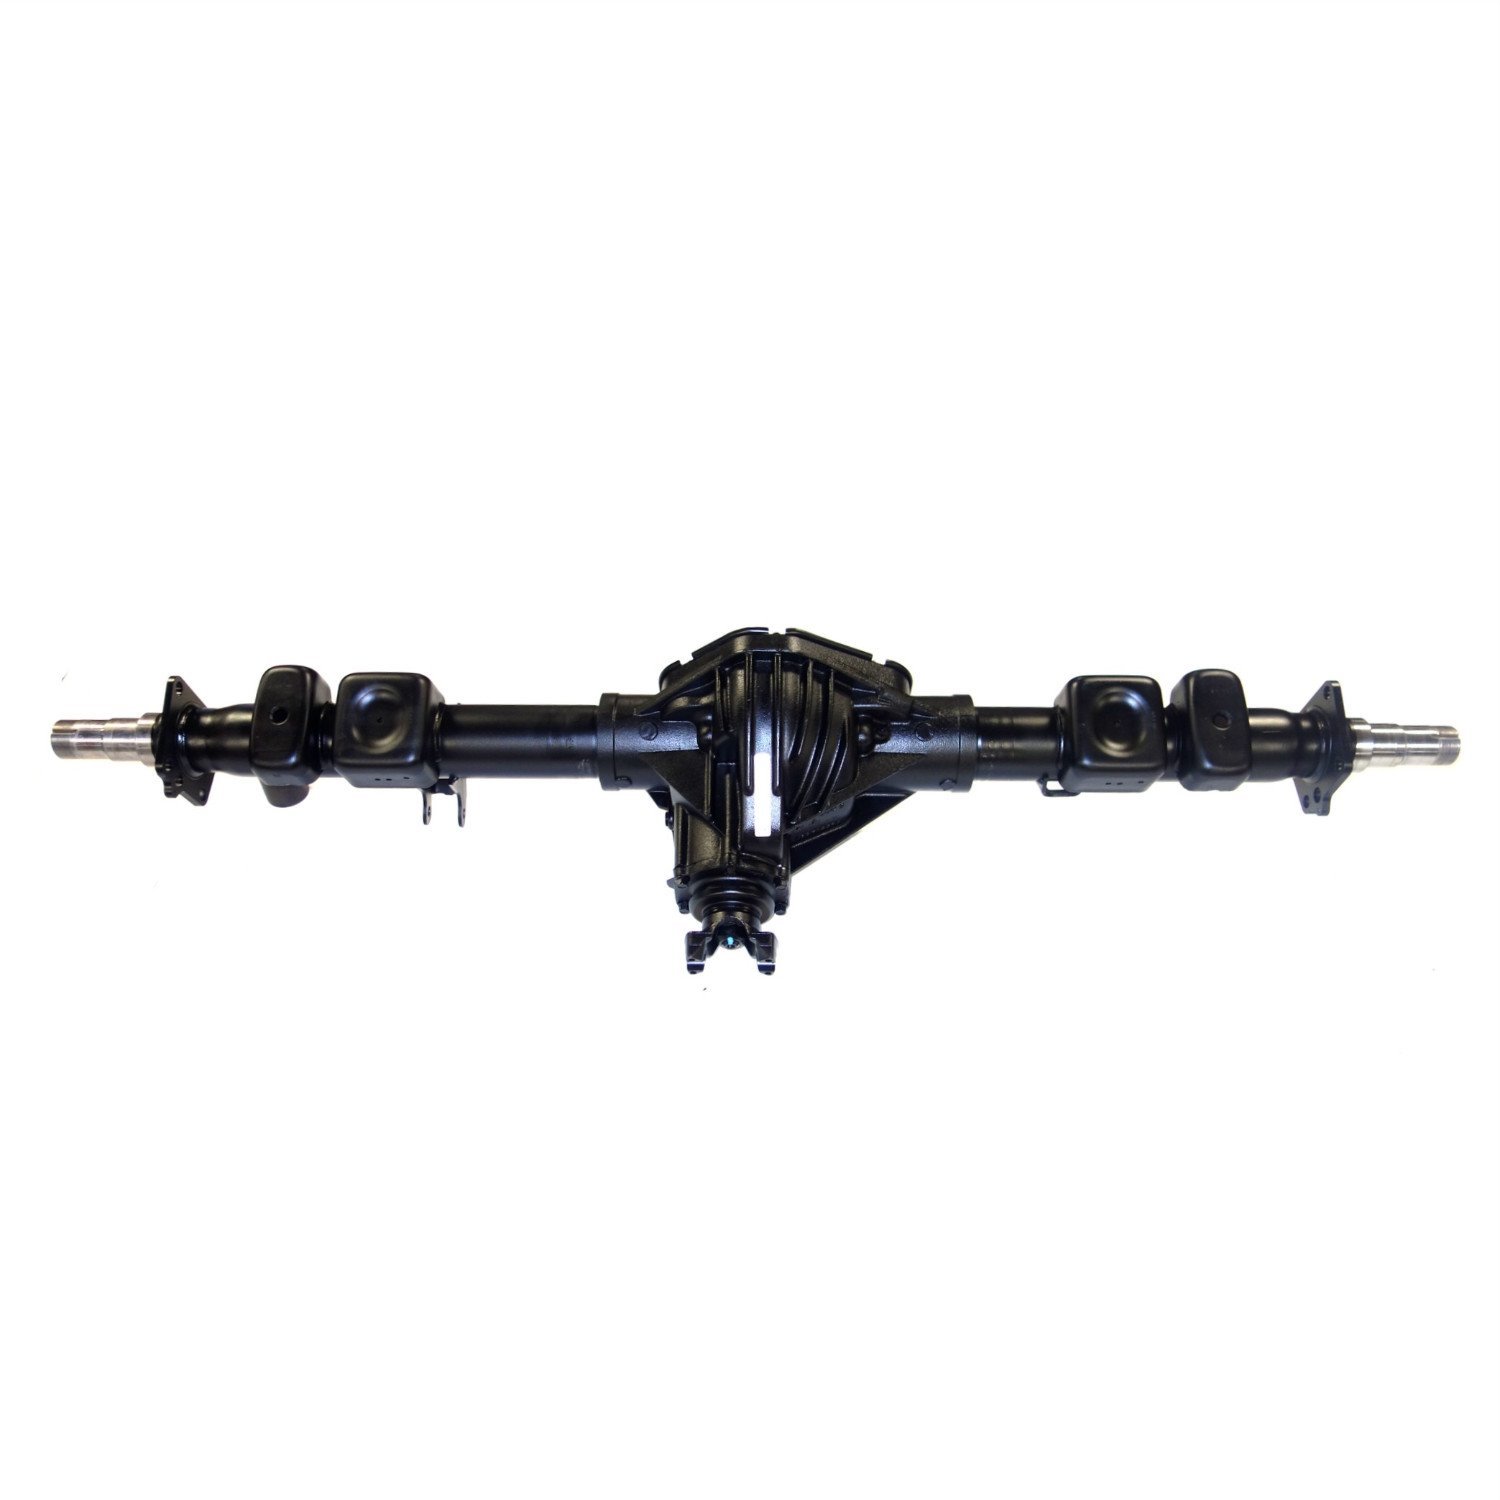 Remanufactured 10.5" Rear Axle Assembly for Chevy Silverado & GMC Sierra 2500HD